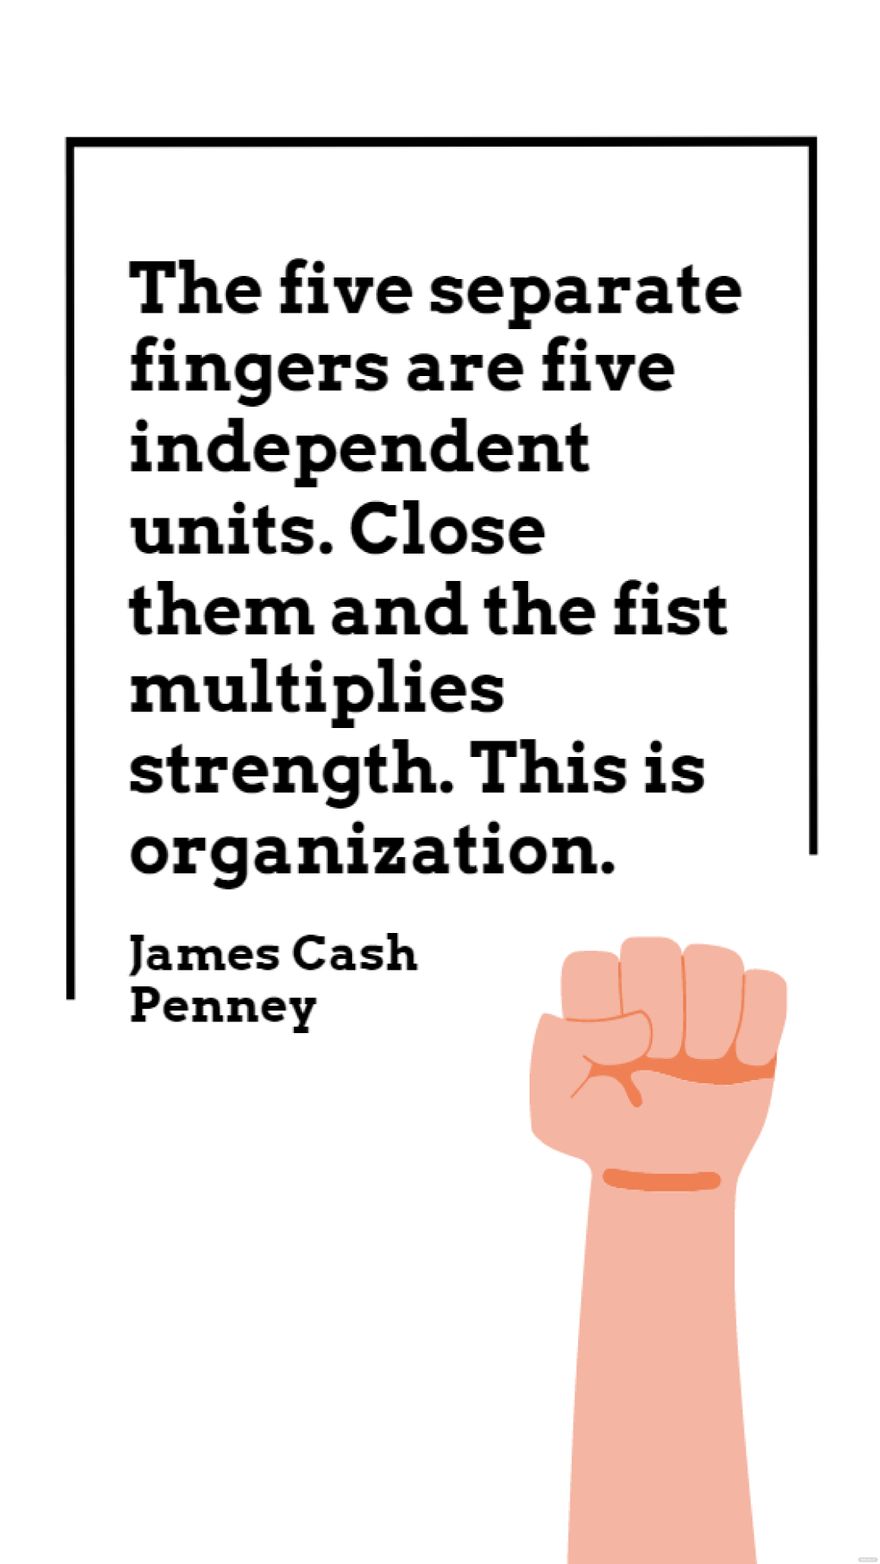 James Cash Penney - The five separate fingers are five independent units. Close them and the fist multiplies strength. This is organization.